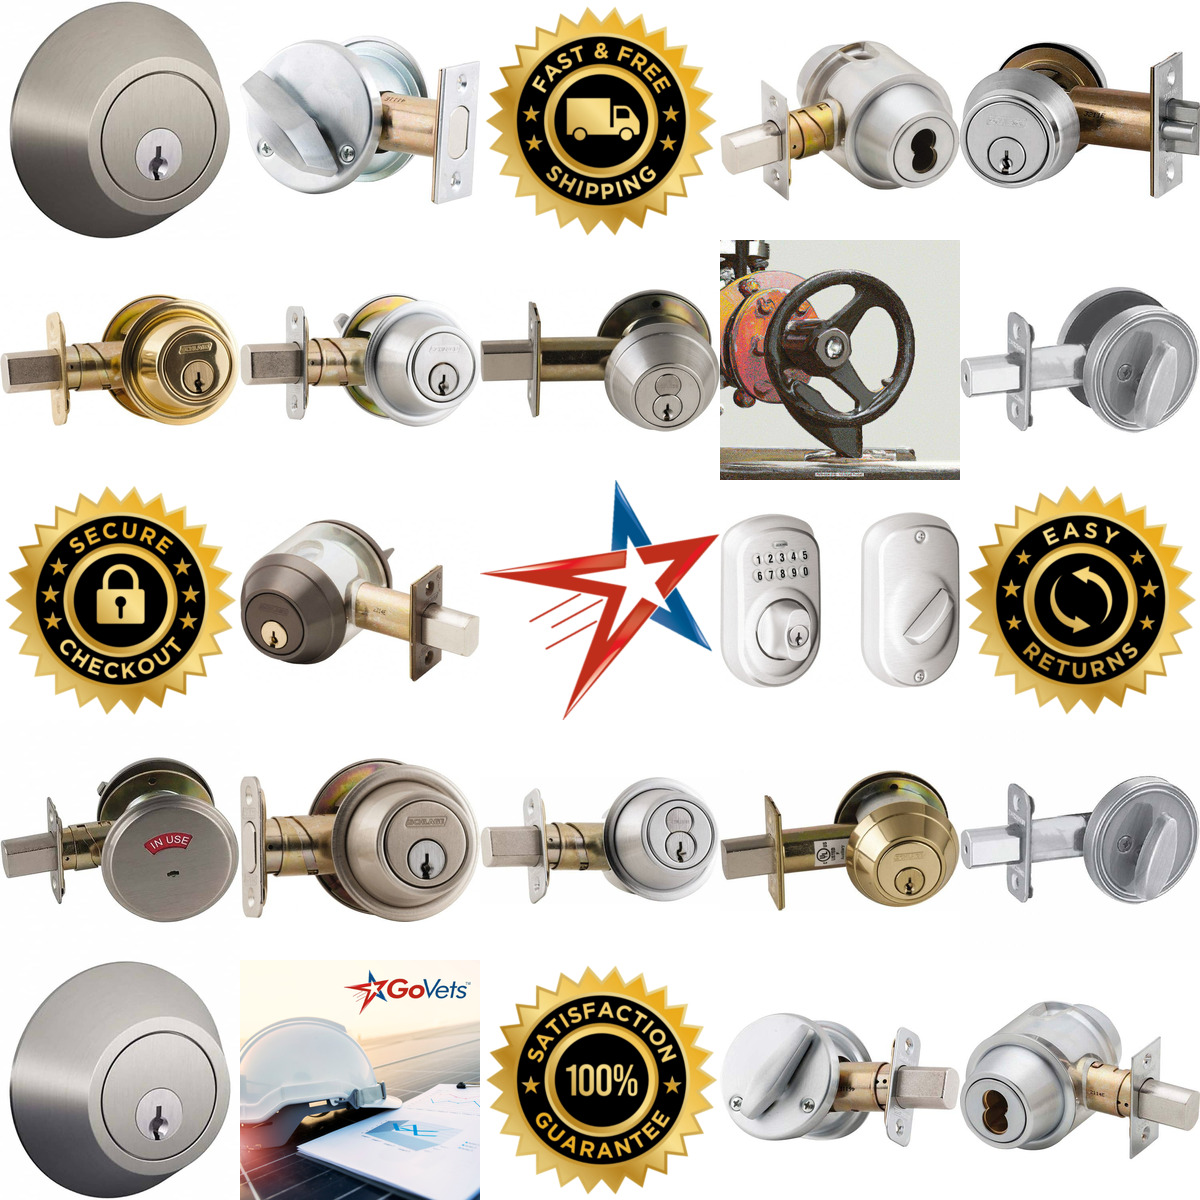 A selection of Schlage products on GoVets